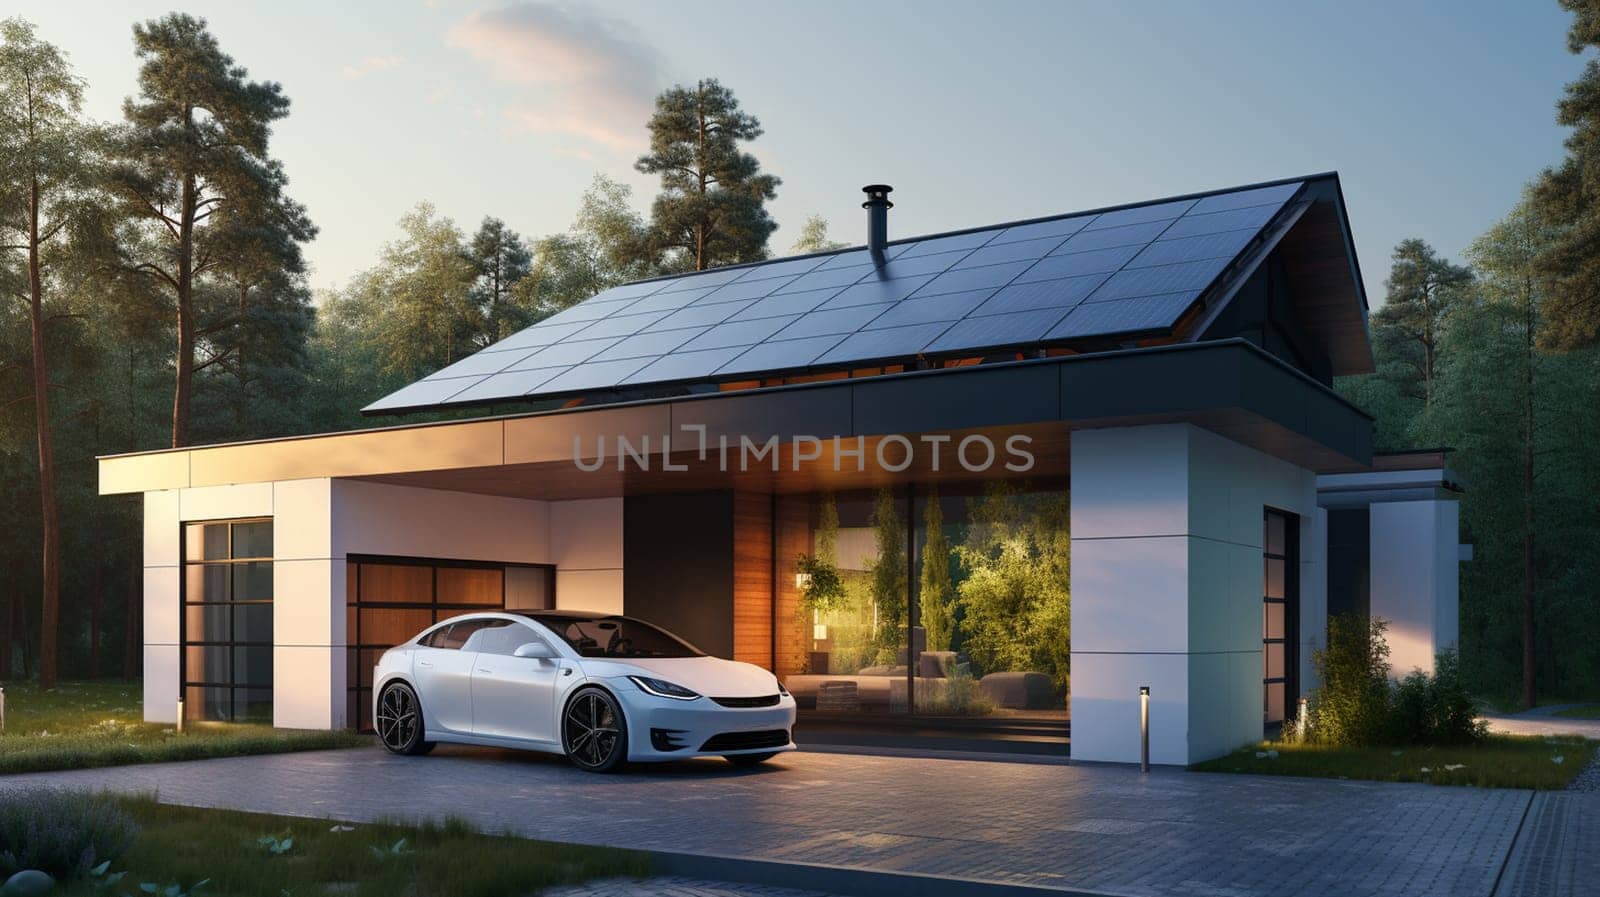 Solar panels on the roof of the house. 3D rendering. by Andelov13